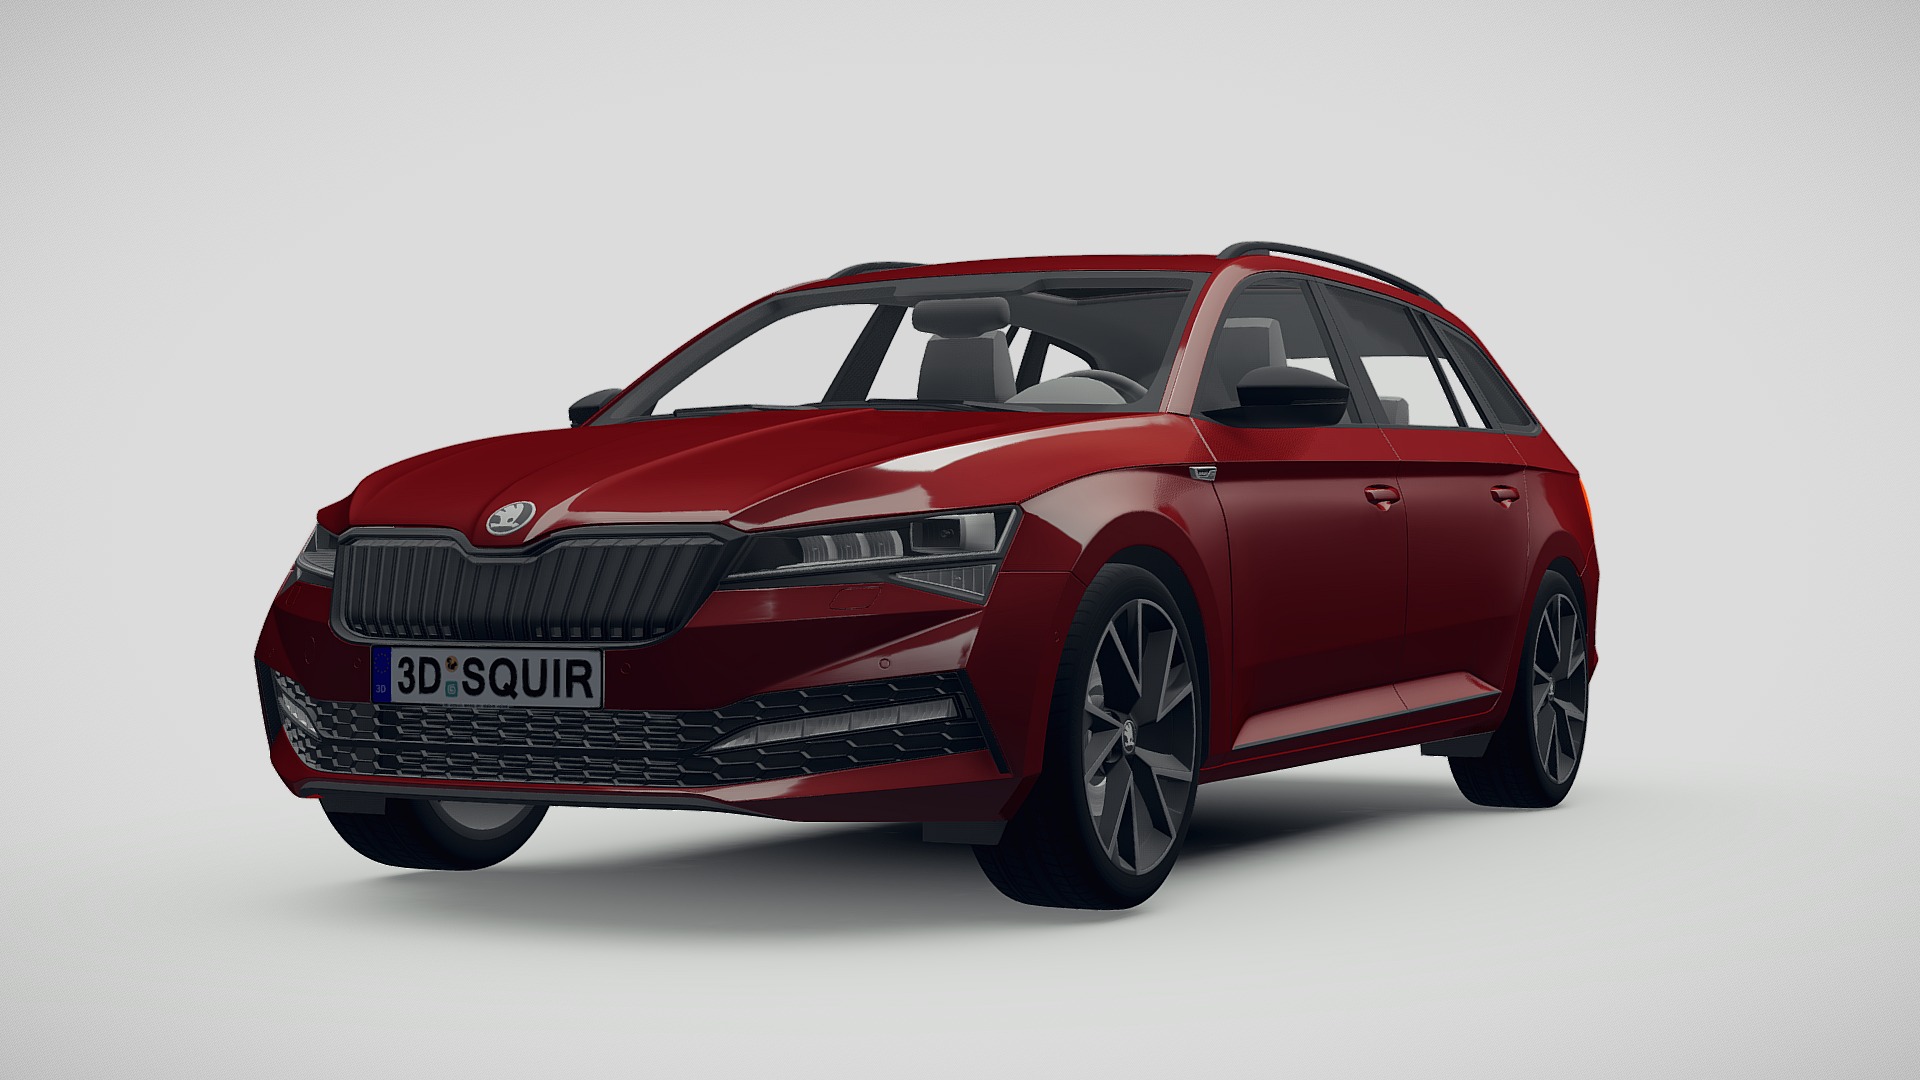 3D model Skoda Superb Combi 2020 - This is a 3D model of the Skoda Superb Combi 2020. The 3D model is about a red car with a white background.